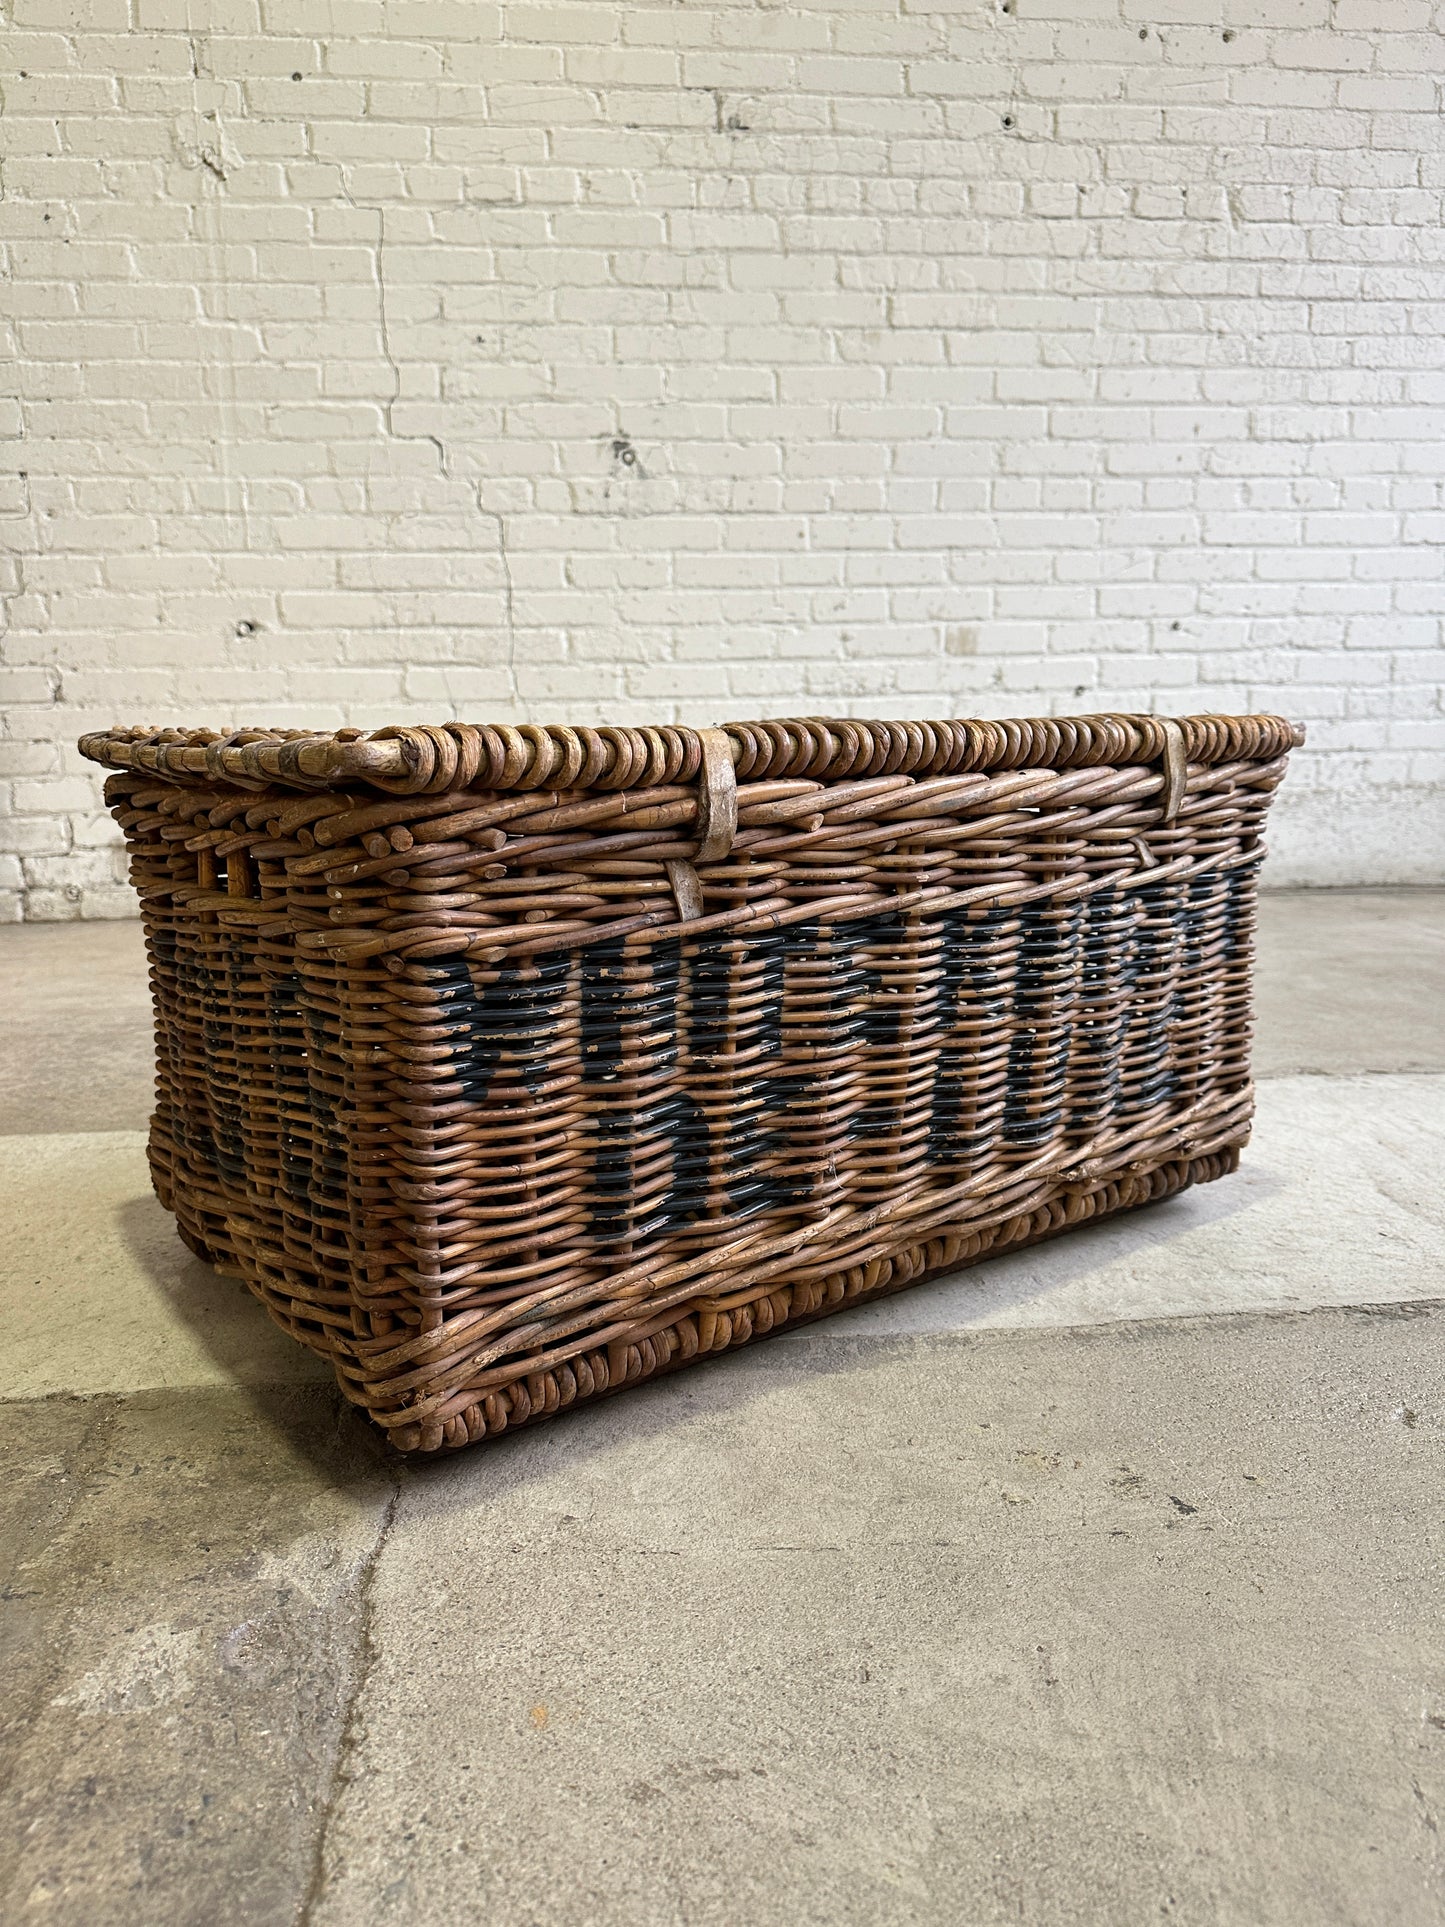 Antique English Mill Basket with Leather Straps, c. 1910